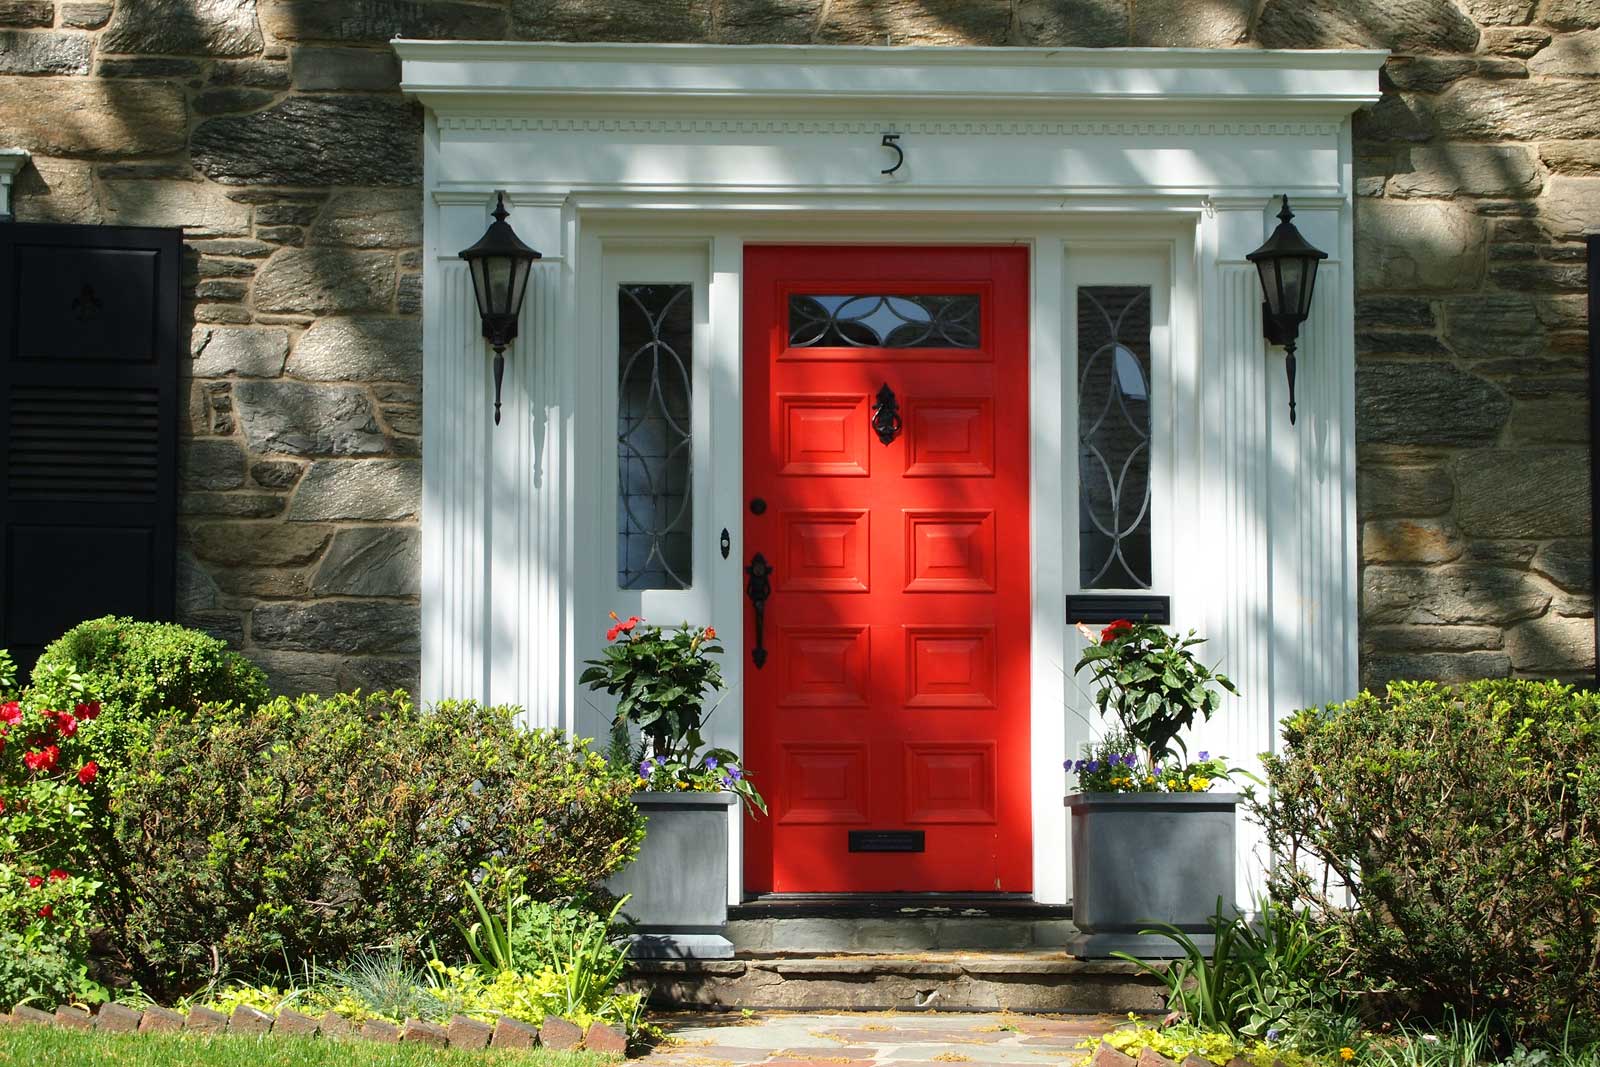 Home Design Red Exterior Home Design Decorated With Red Front Door Ideas Made From Wooden Material Using Traditional Style For Inspiration Exterior Red Front Door As Surprising Door Design For Modern Home